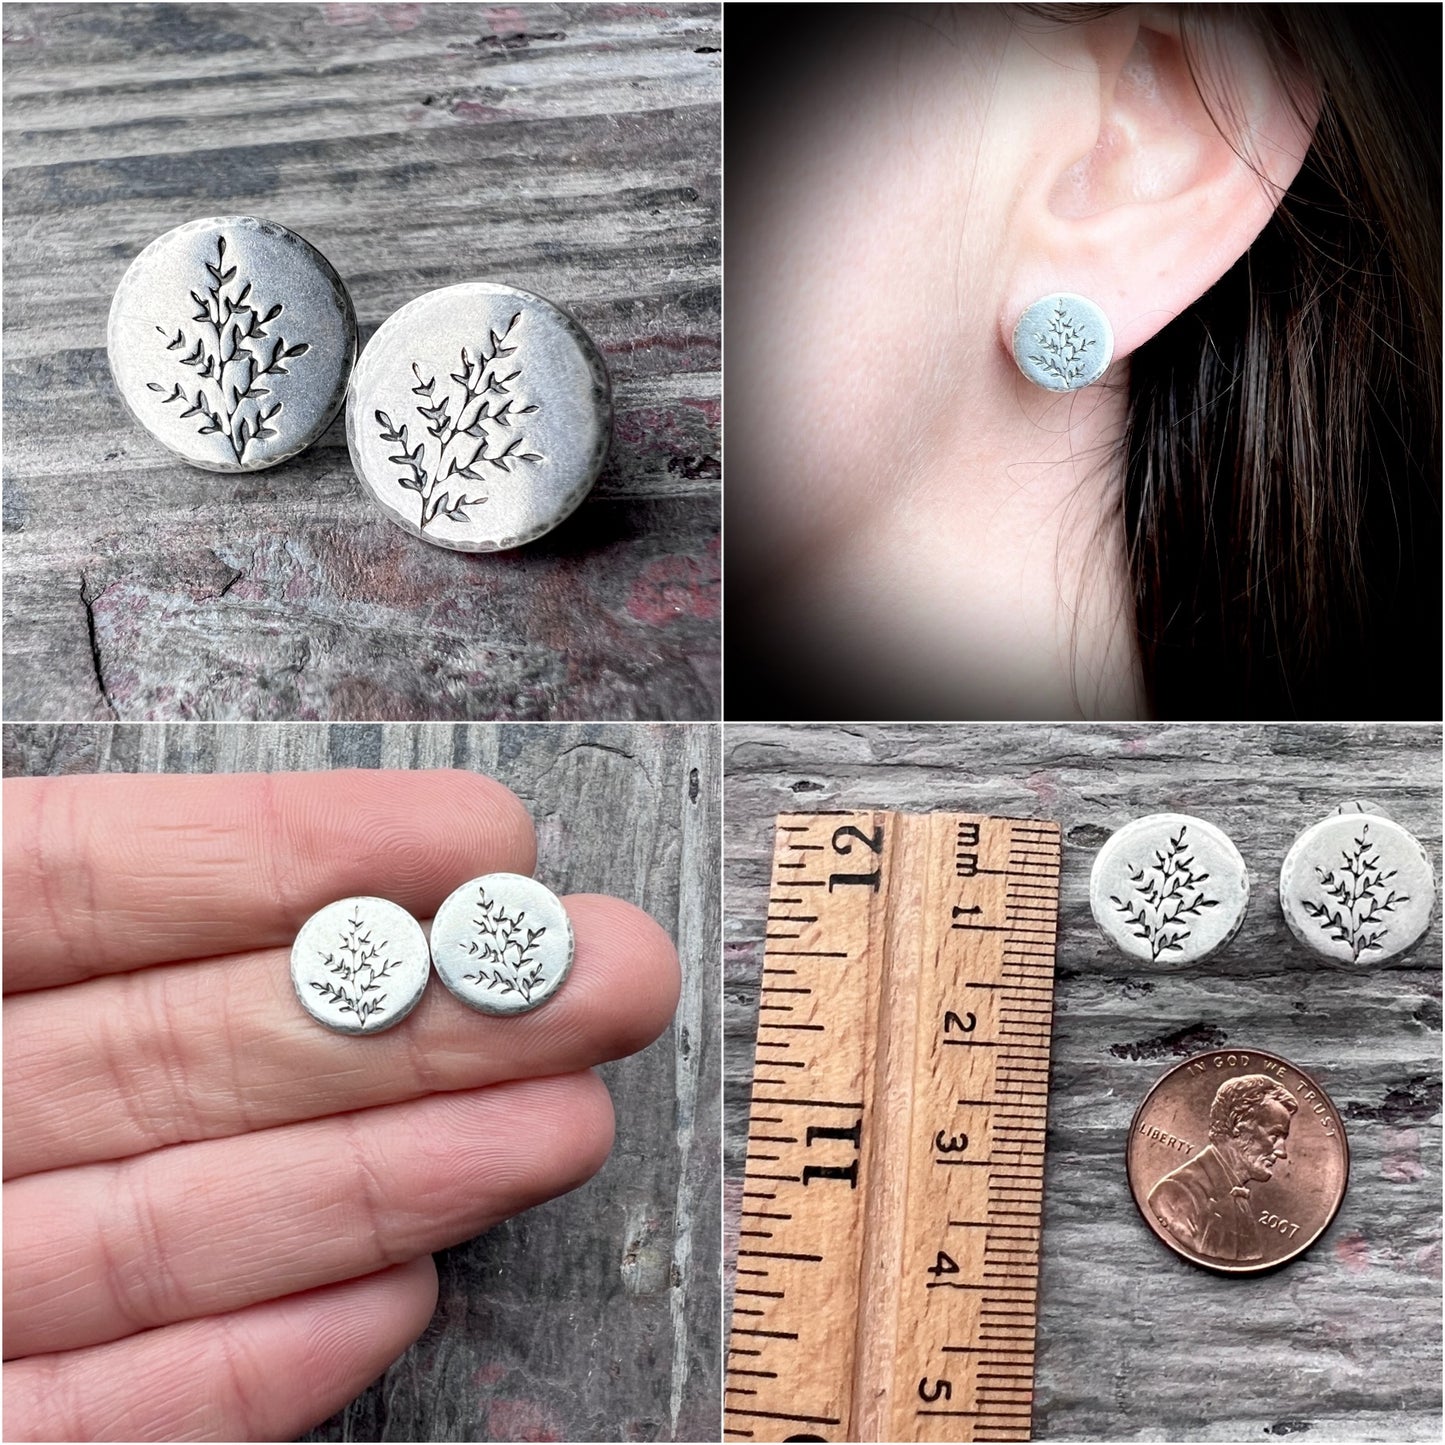 Sterling Silver Sprig Leaf Studs | Small Silver Post Earrings